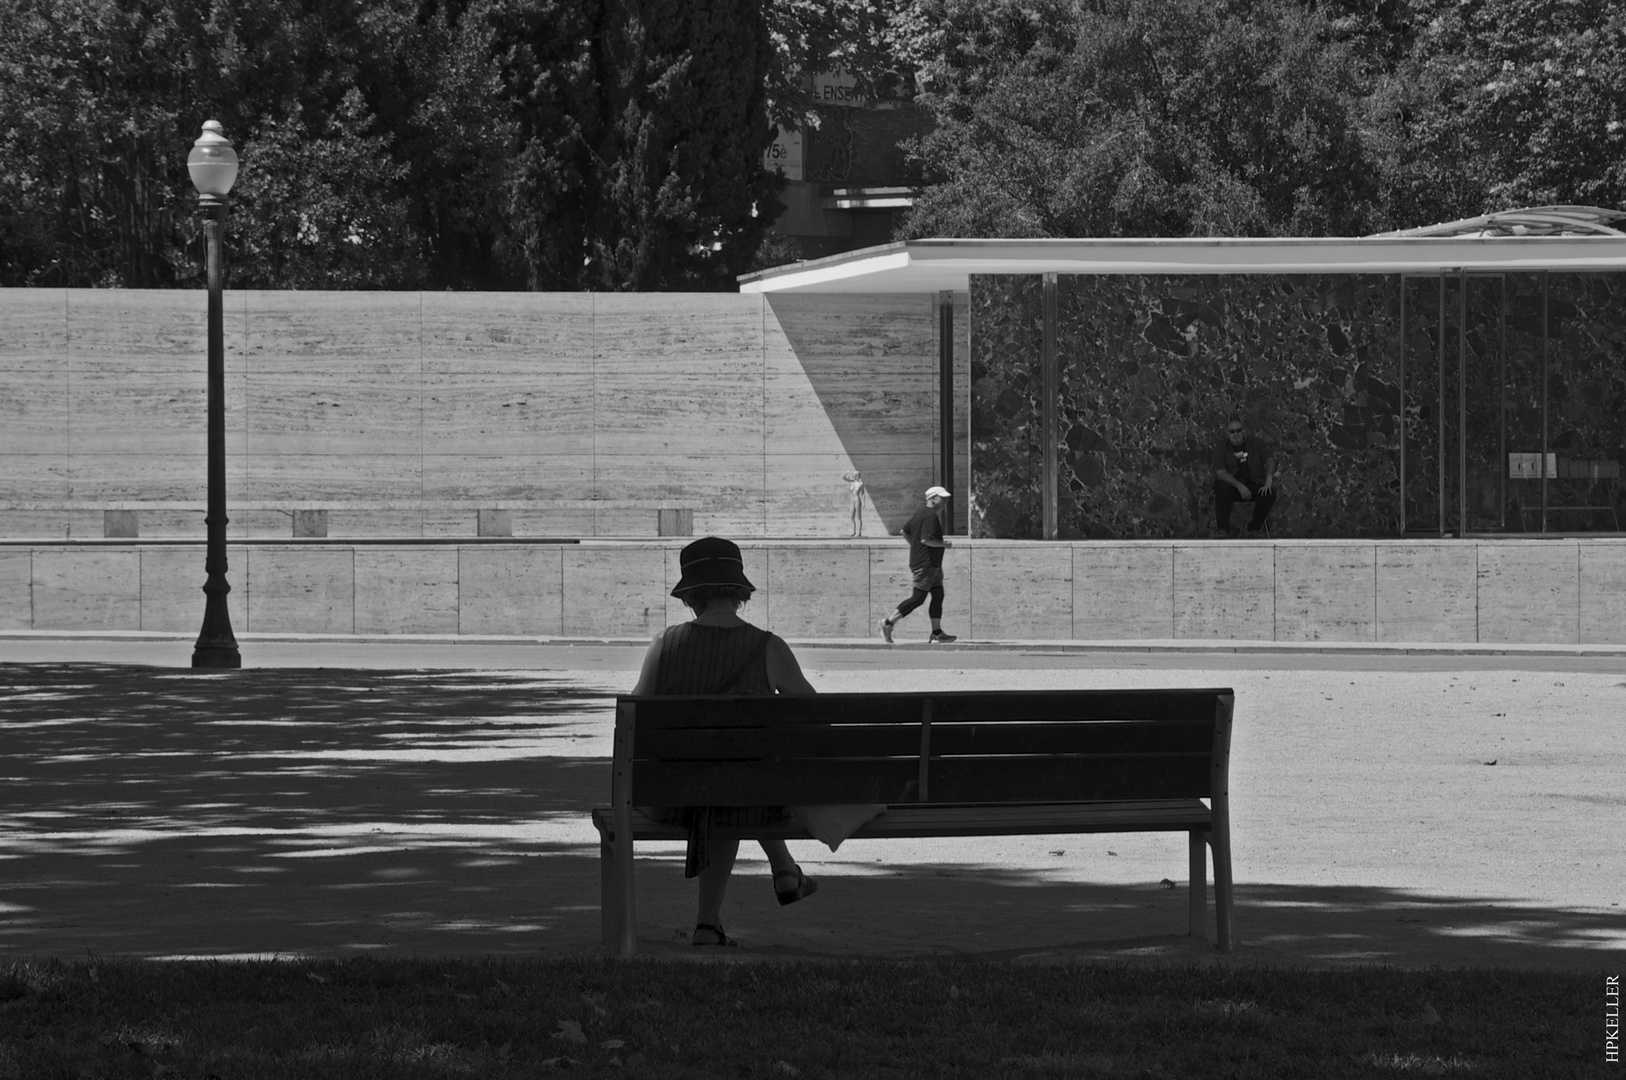 Some days ago in Barcelona, ... relaxation at the Mies van der Rohe Pavillon.